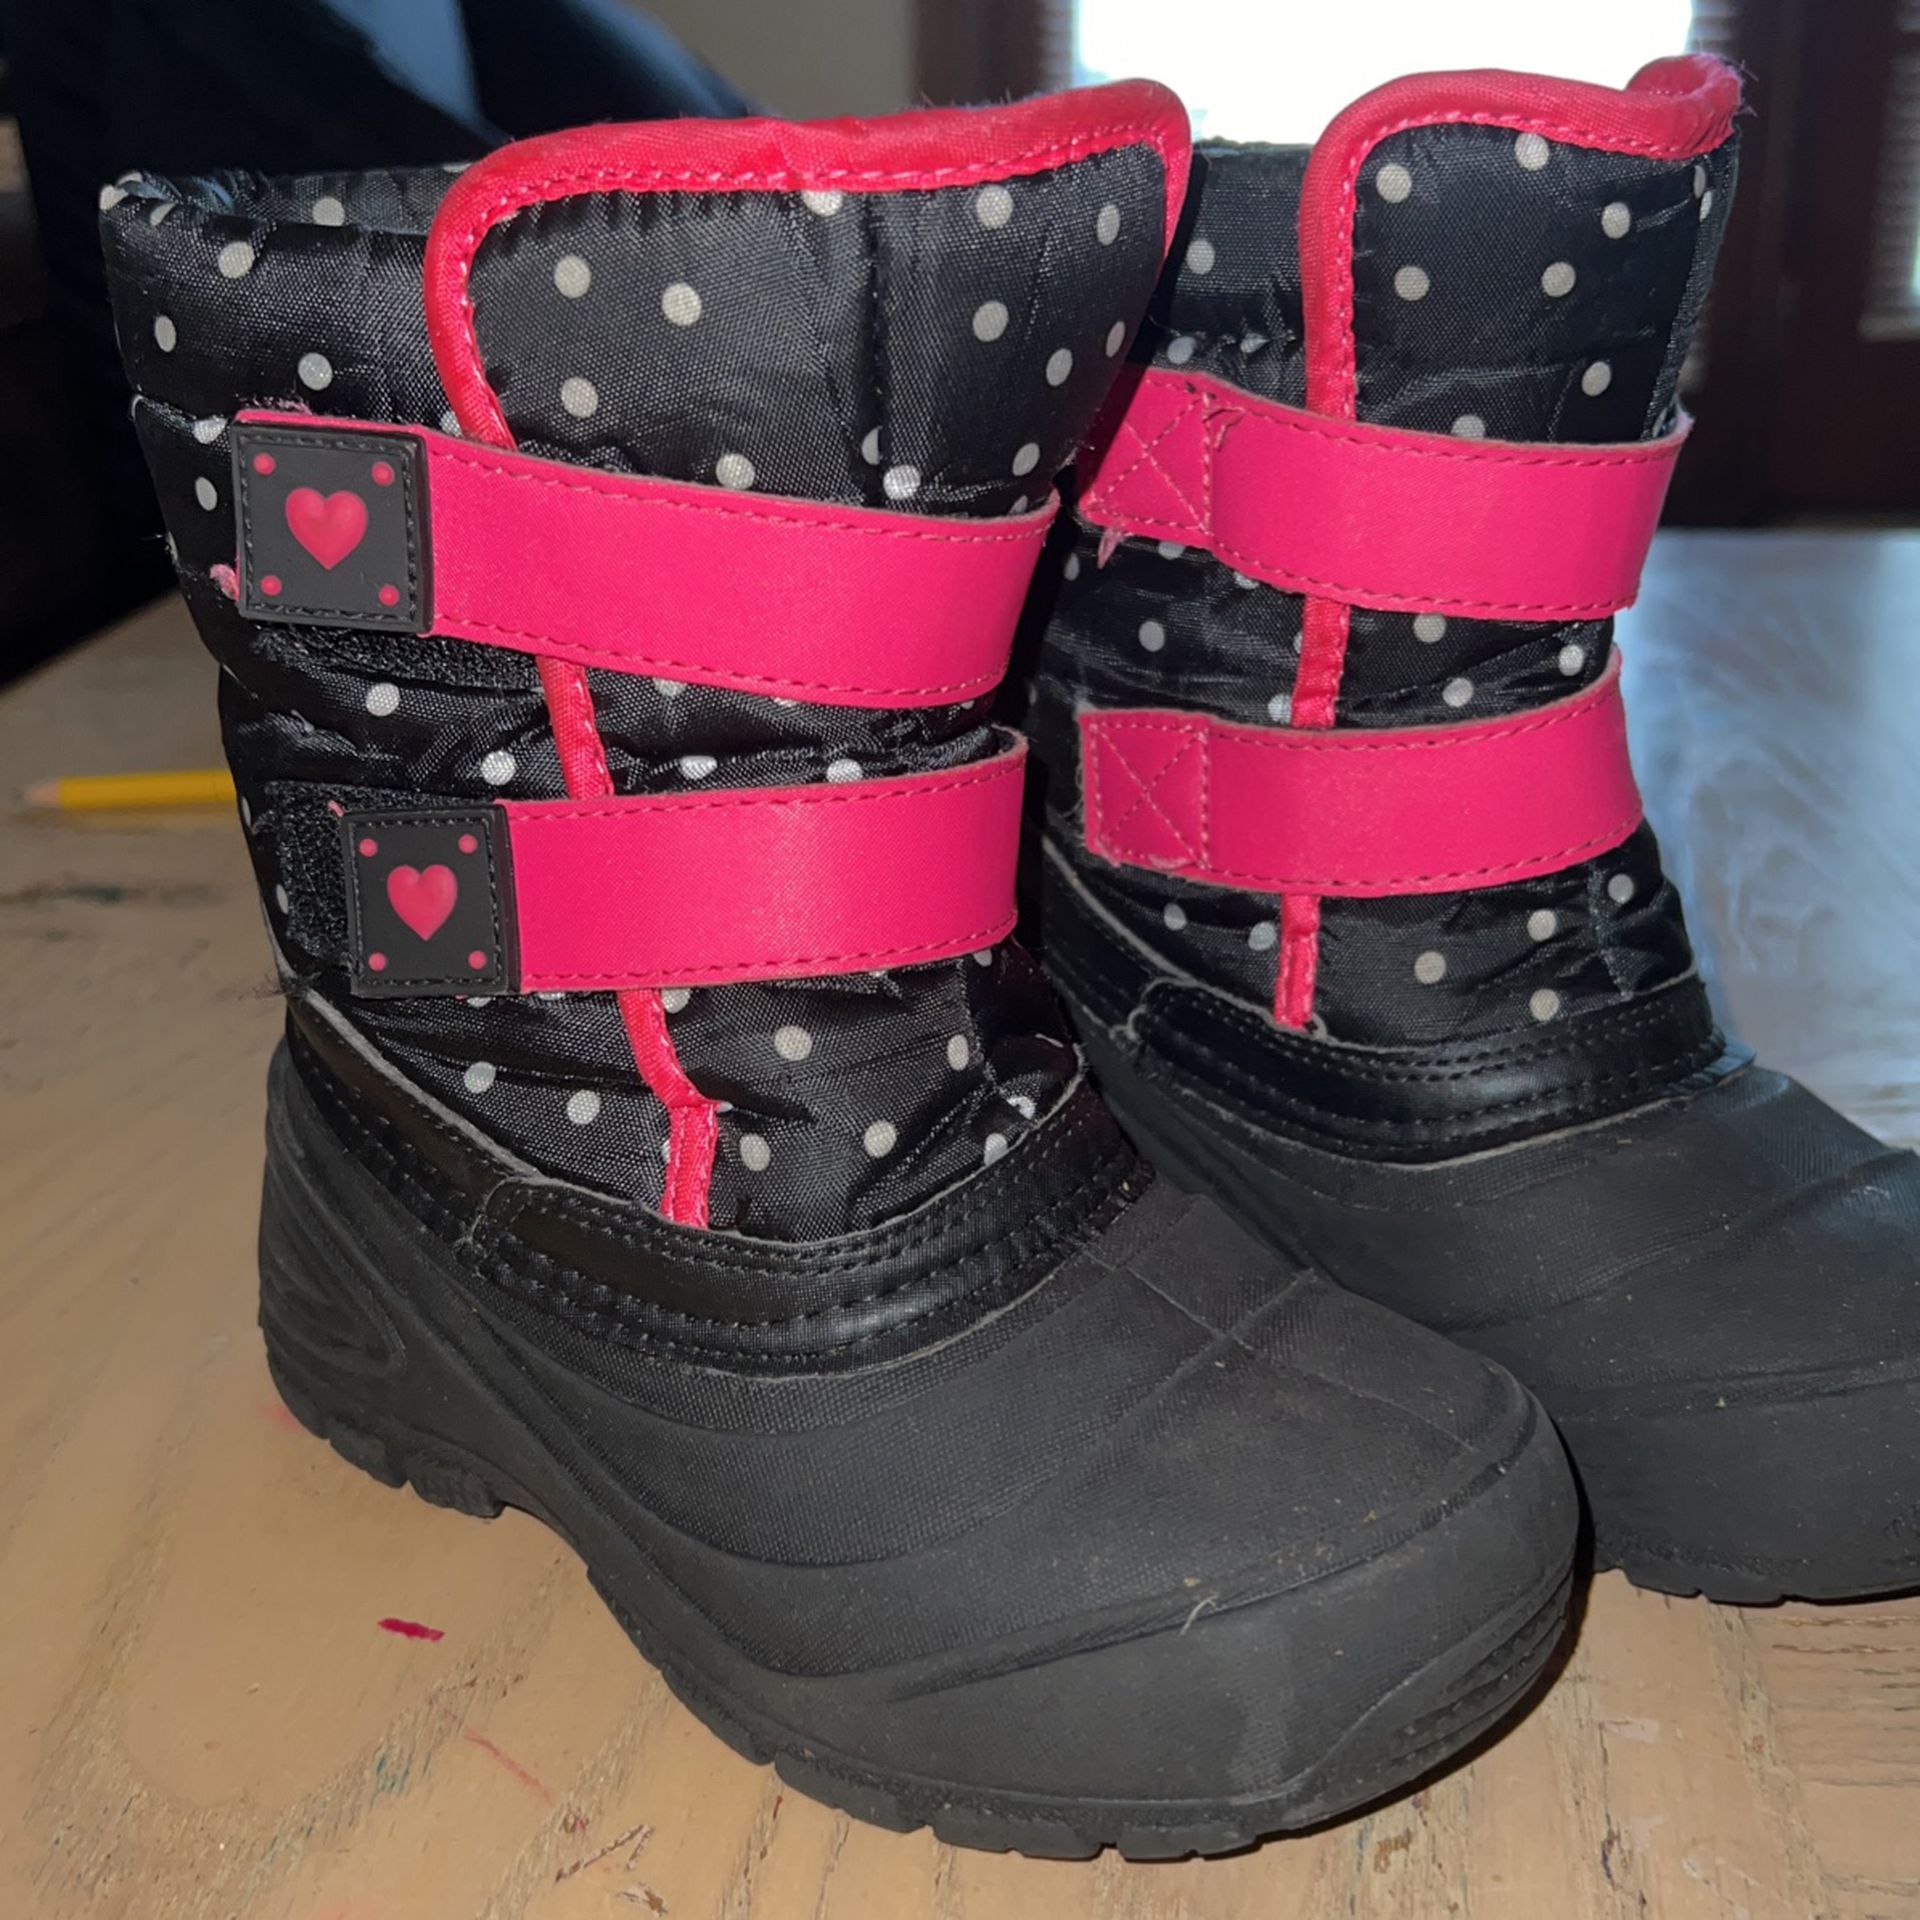 Girls Size 11 Snow Boots